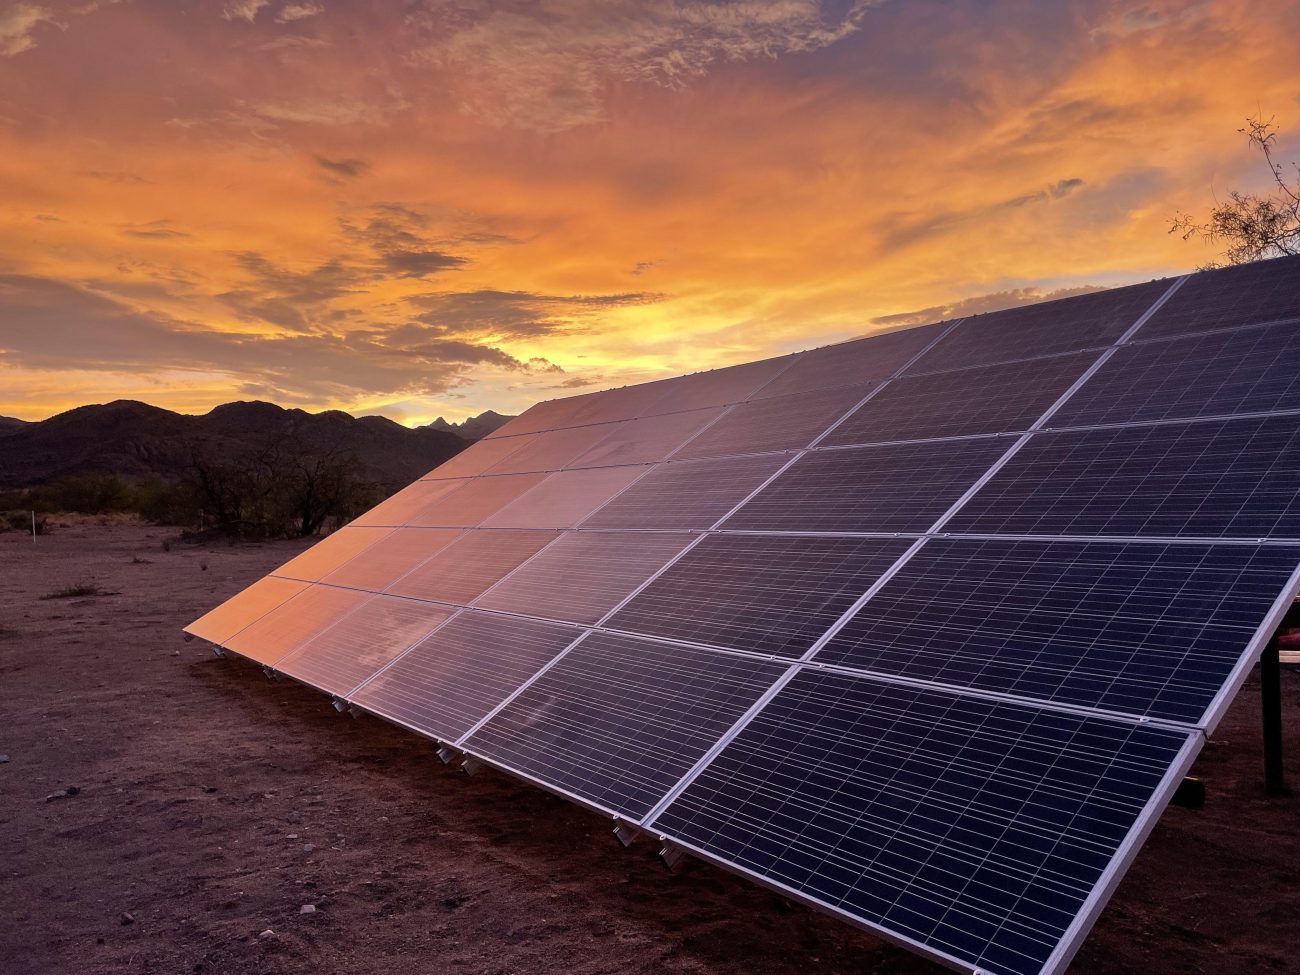 Solar panels and ground mount at sunset.